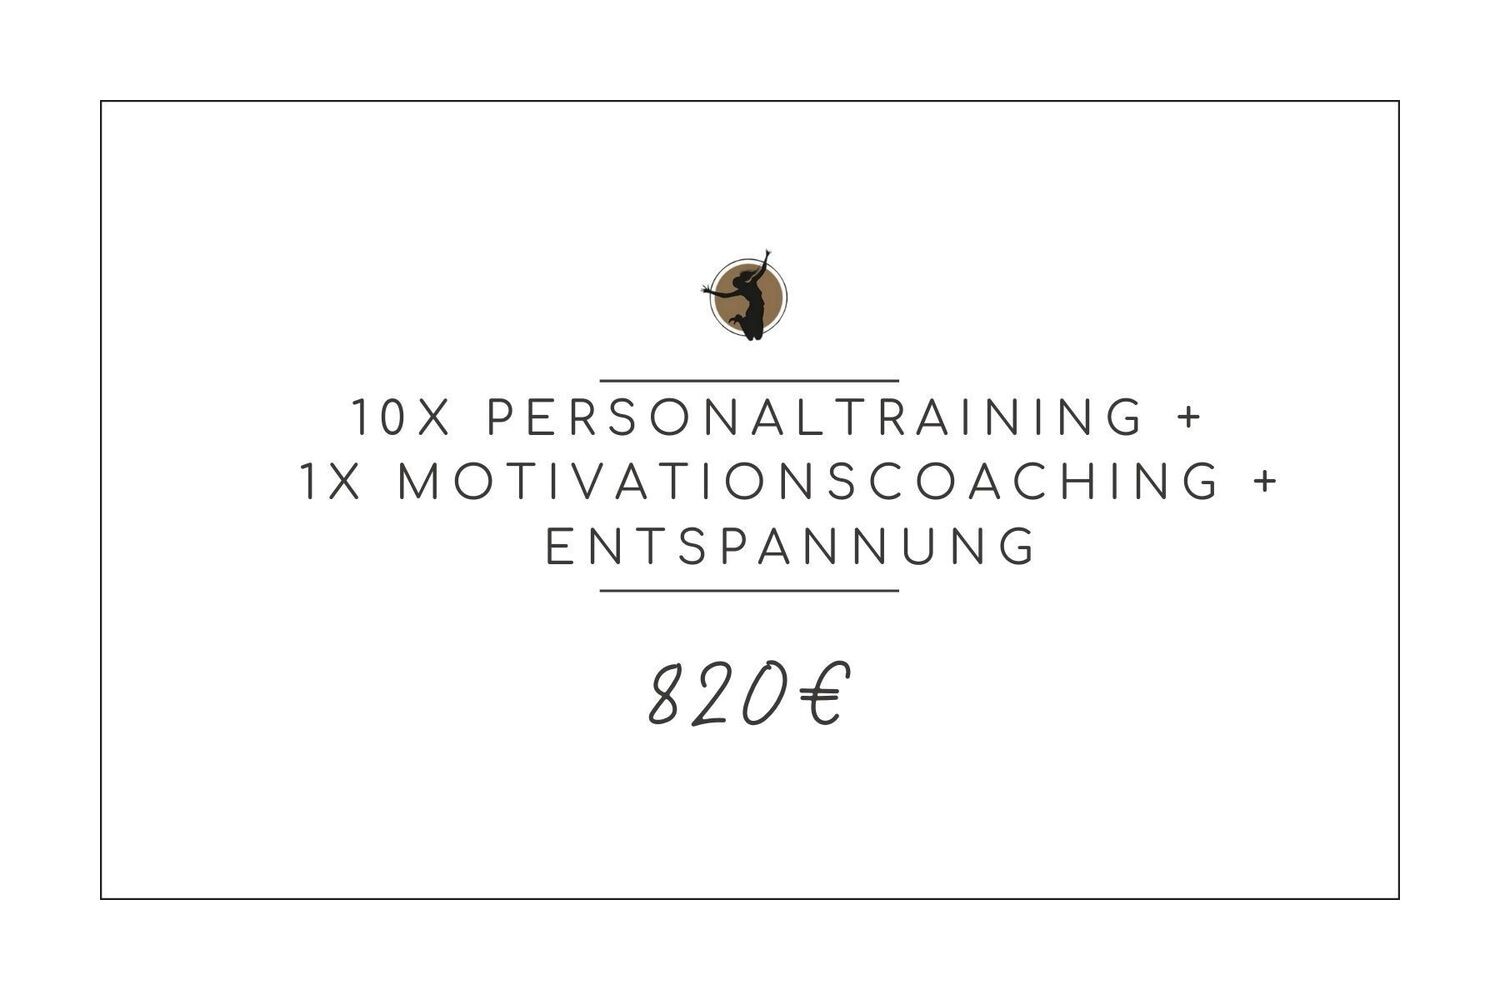 10x Personaltraining + 1x Motivationscoaching + Entspannung